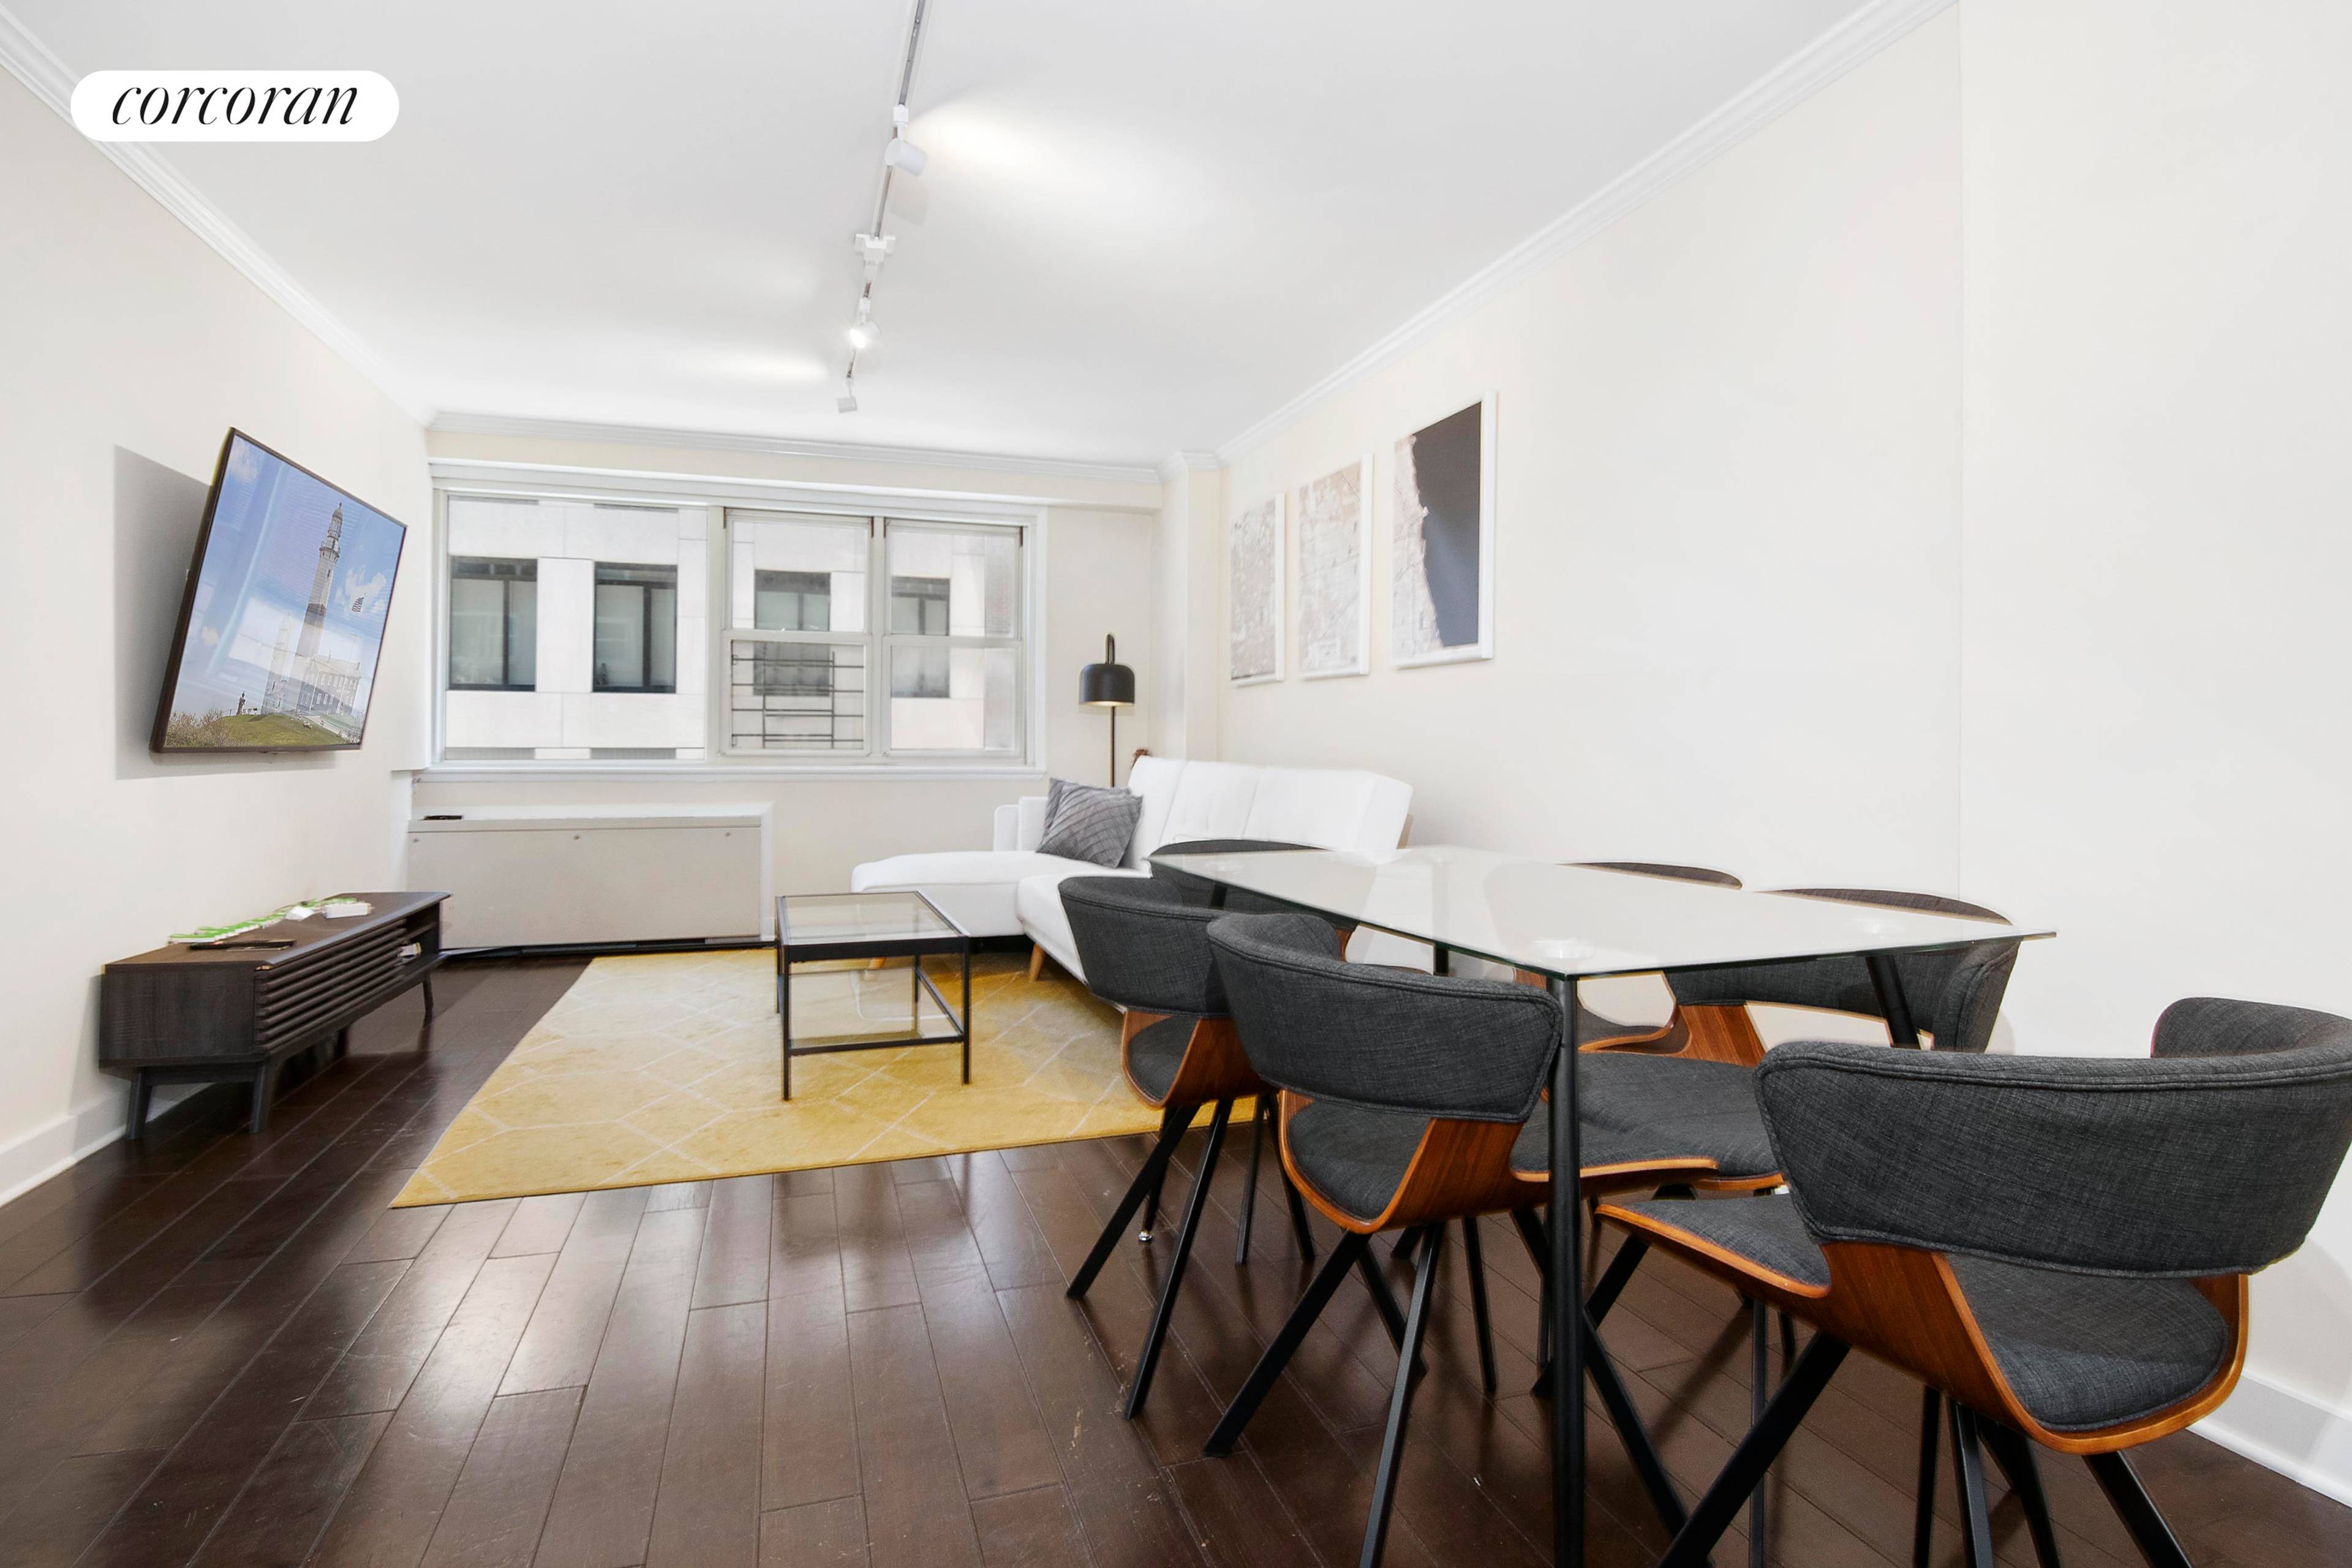 First Open House Sunday, February 19th from 12 00pm 1 00pm Renovated 1 bedroom for sale in the heart of Brooklyn Heights, with modern finishes, a new backsplash, stainless steel ...